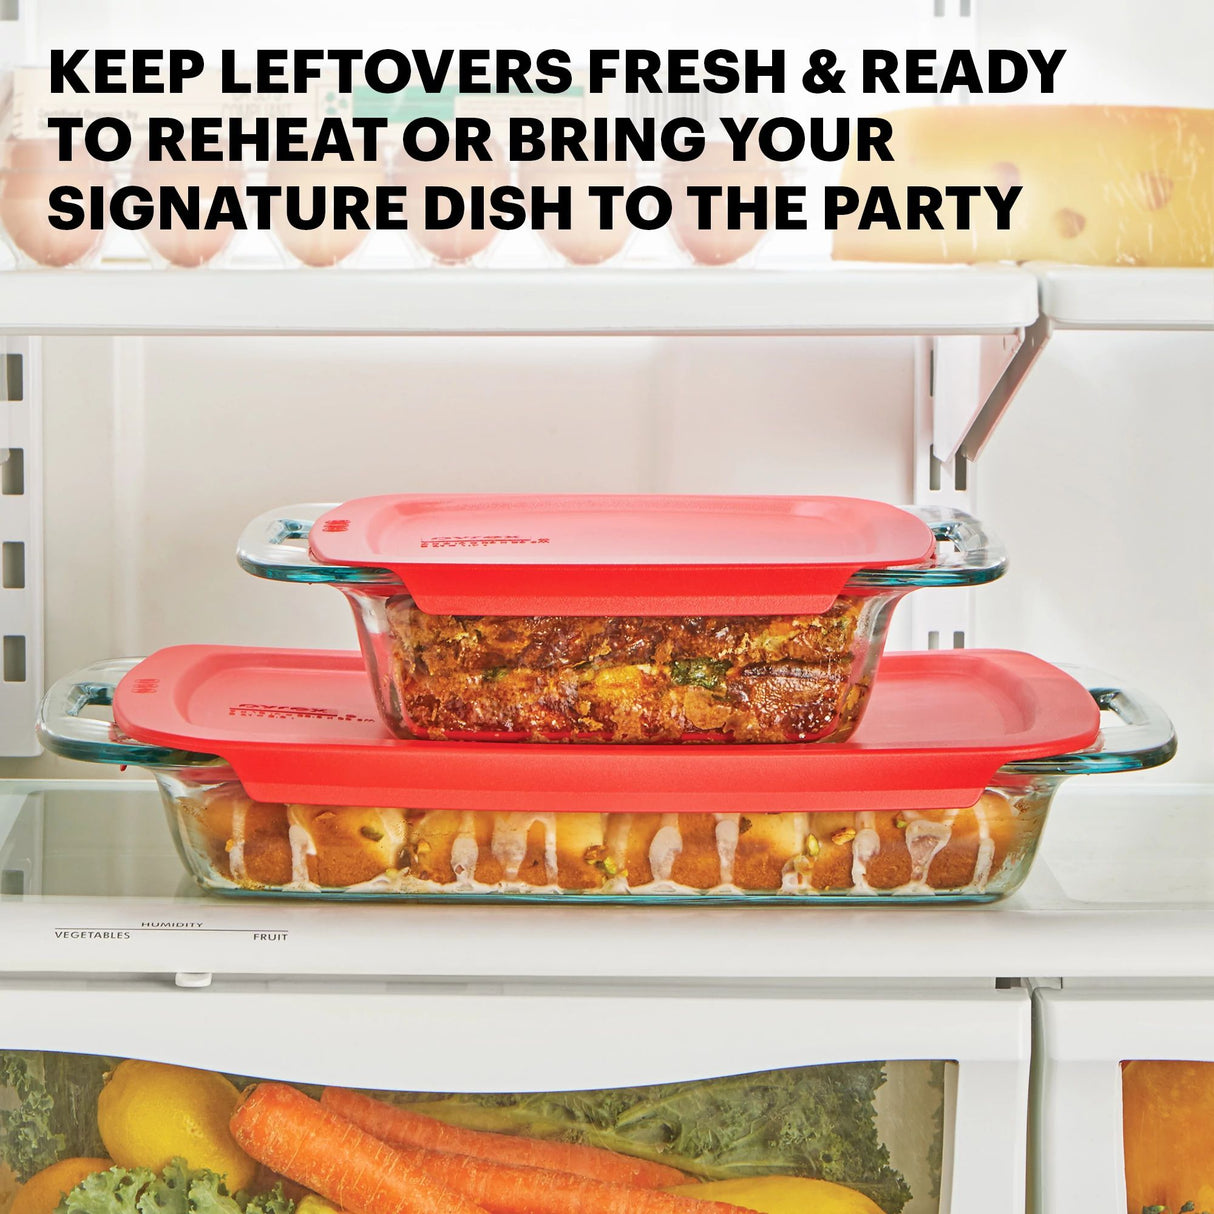  Easy Grab 4-piece Rectangular Baking Dish Set with text keep leftovers fresh &amp; ready to reheat or bring dish to the party